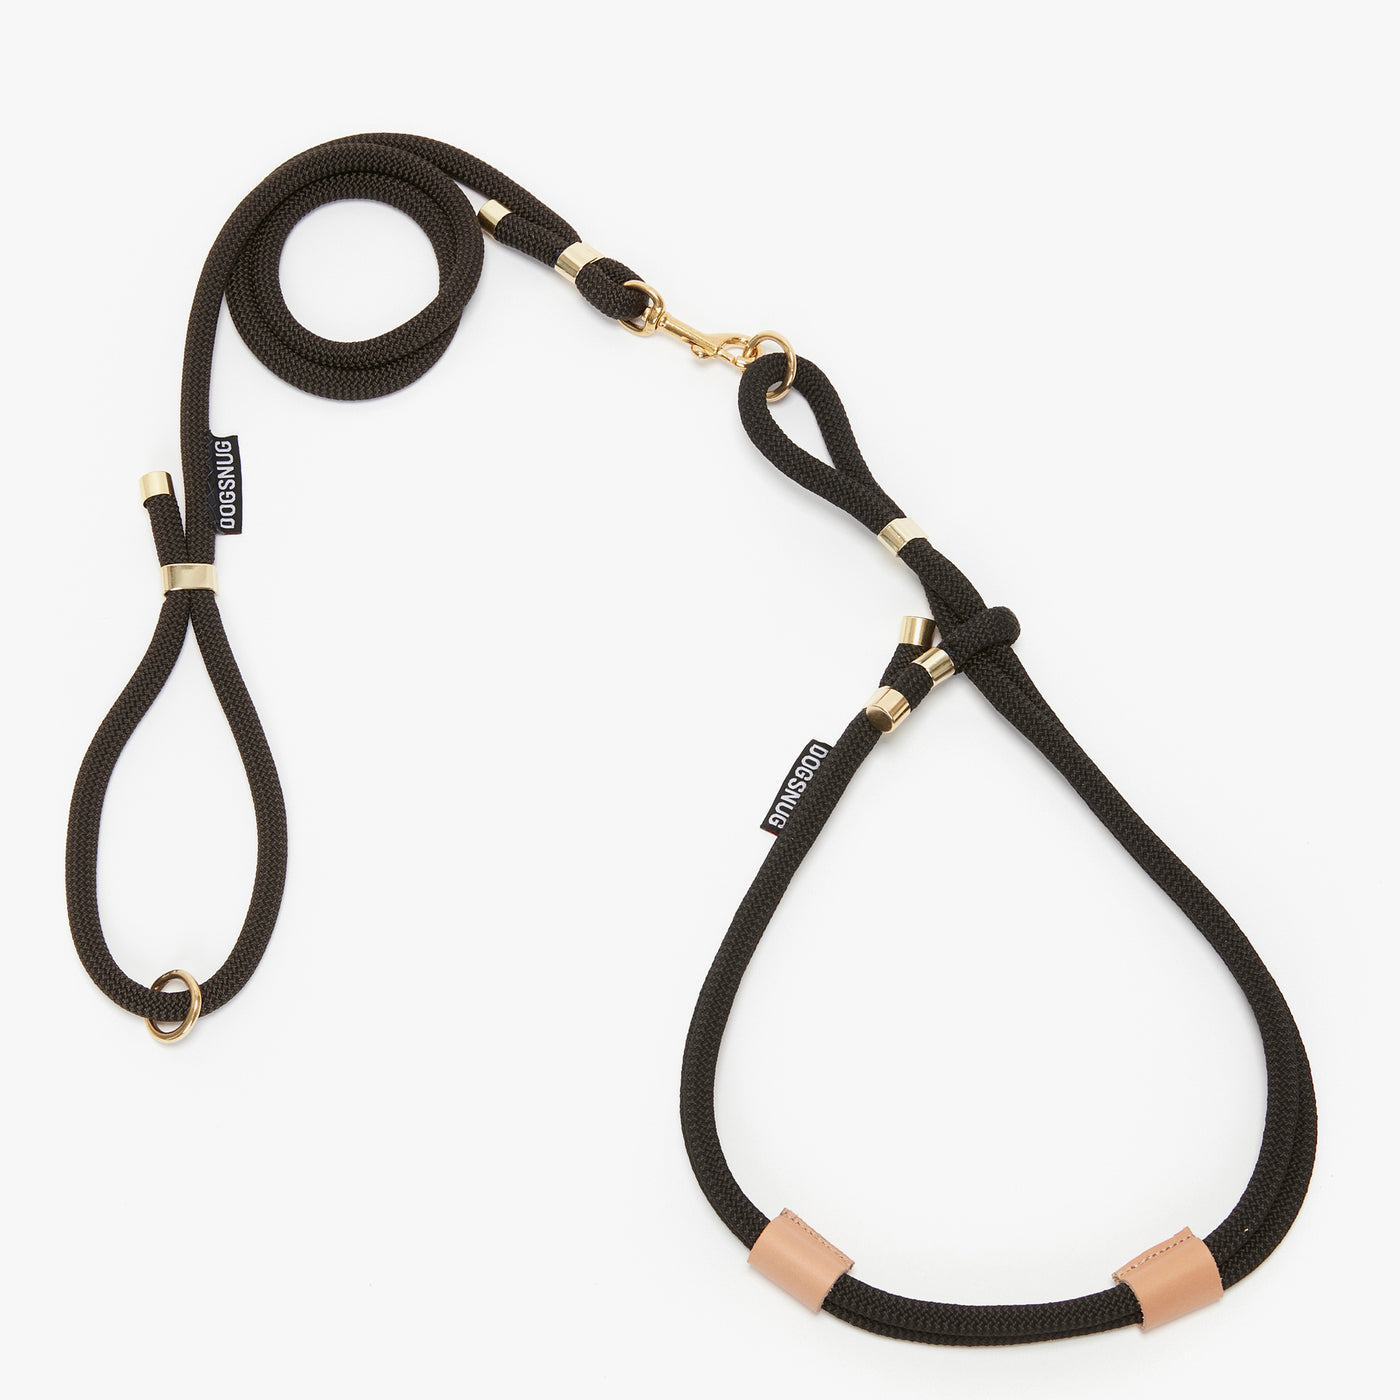 Dog harness in black rope with matching dog lead